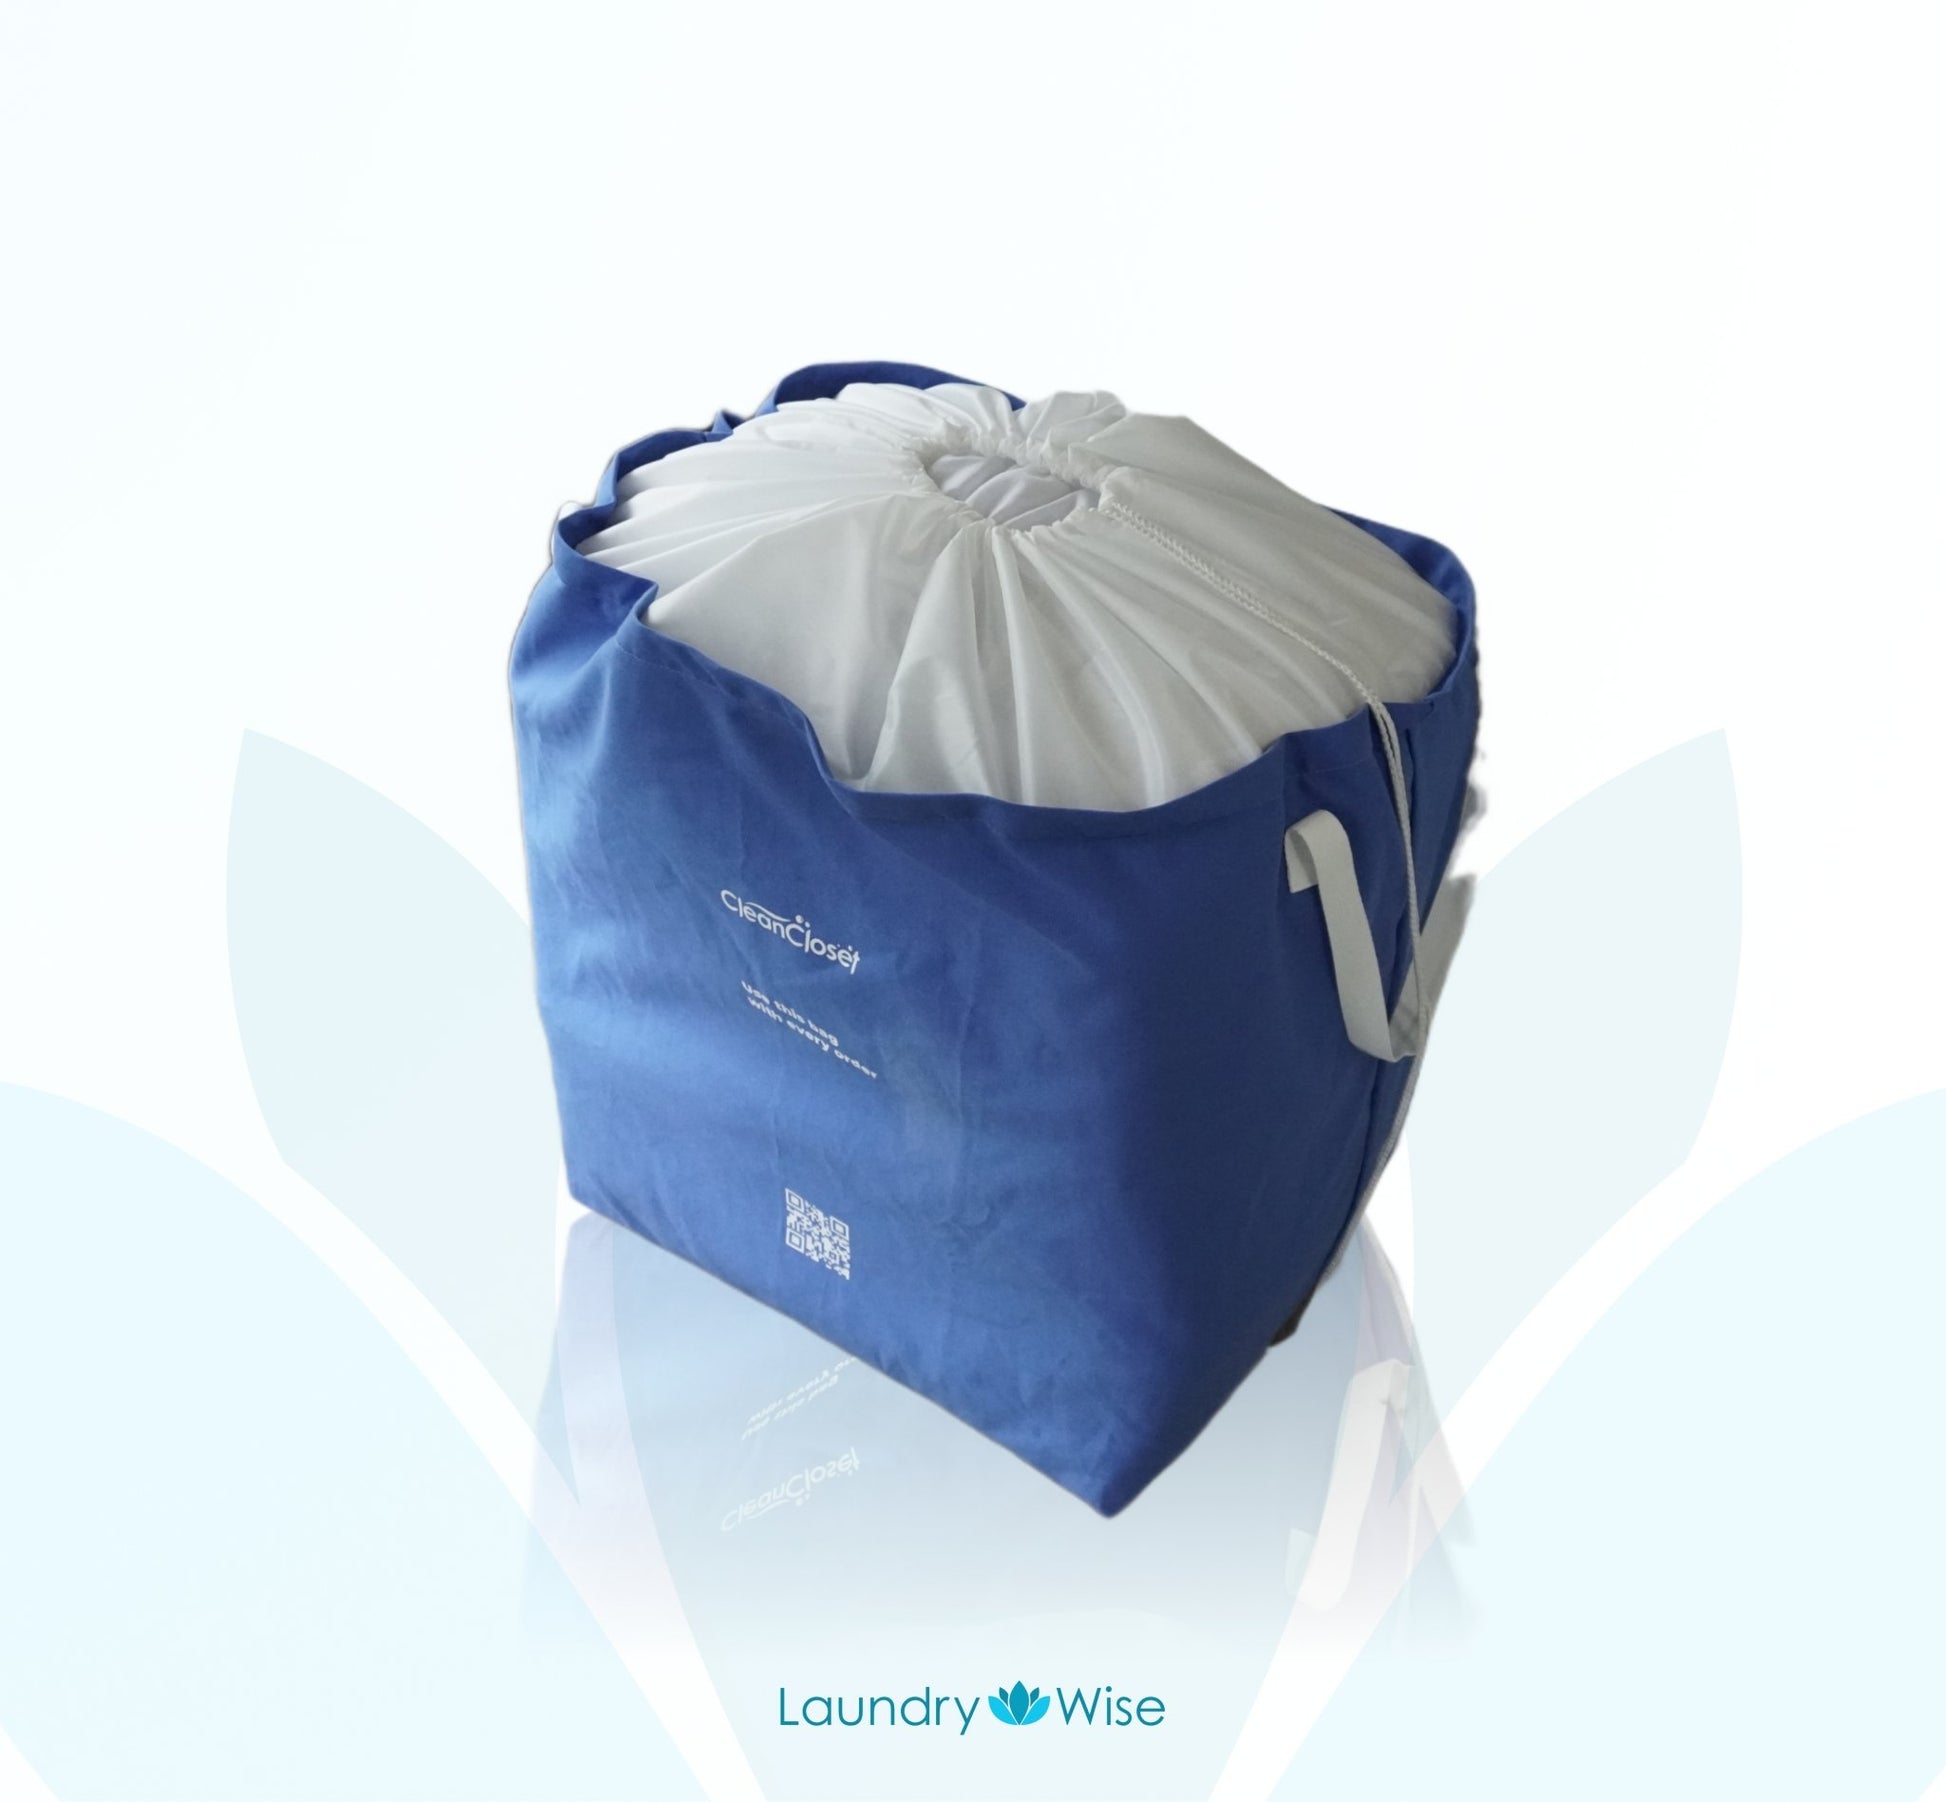 Durable Fabric Wash and Fold Laundry Bag | With Drawstring Cover Bags Laundry Wise   